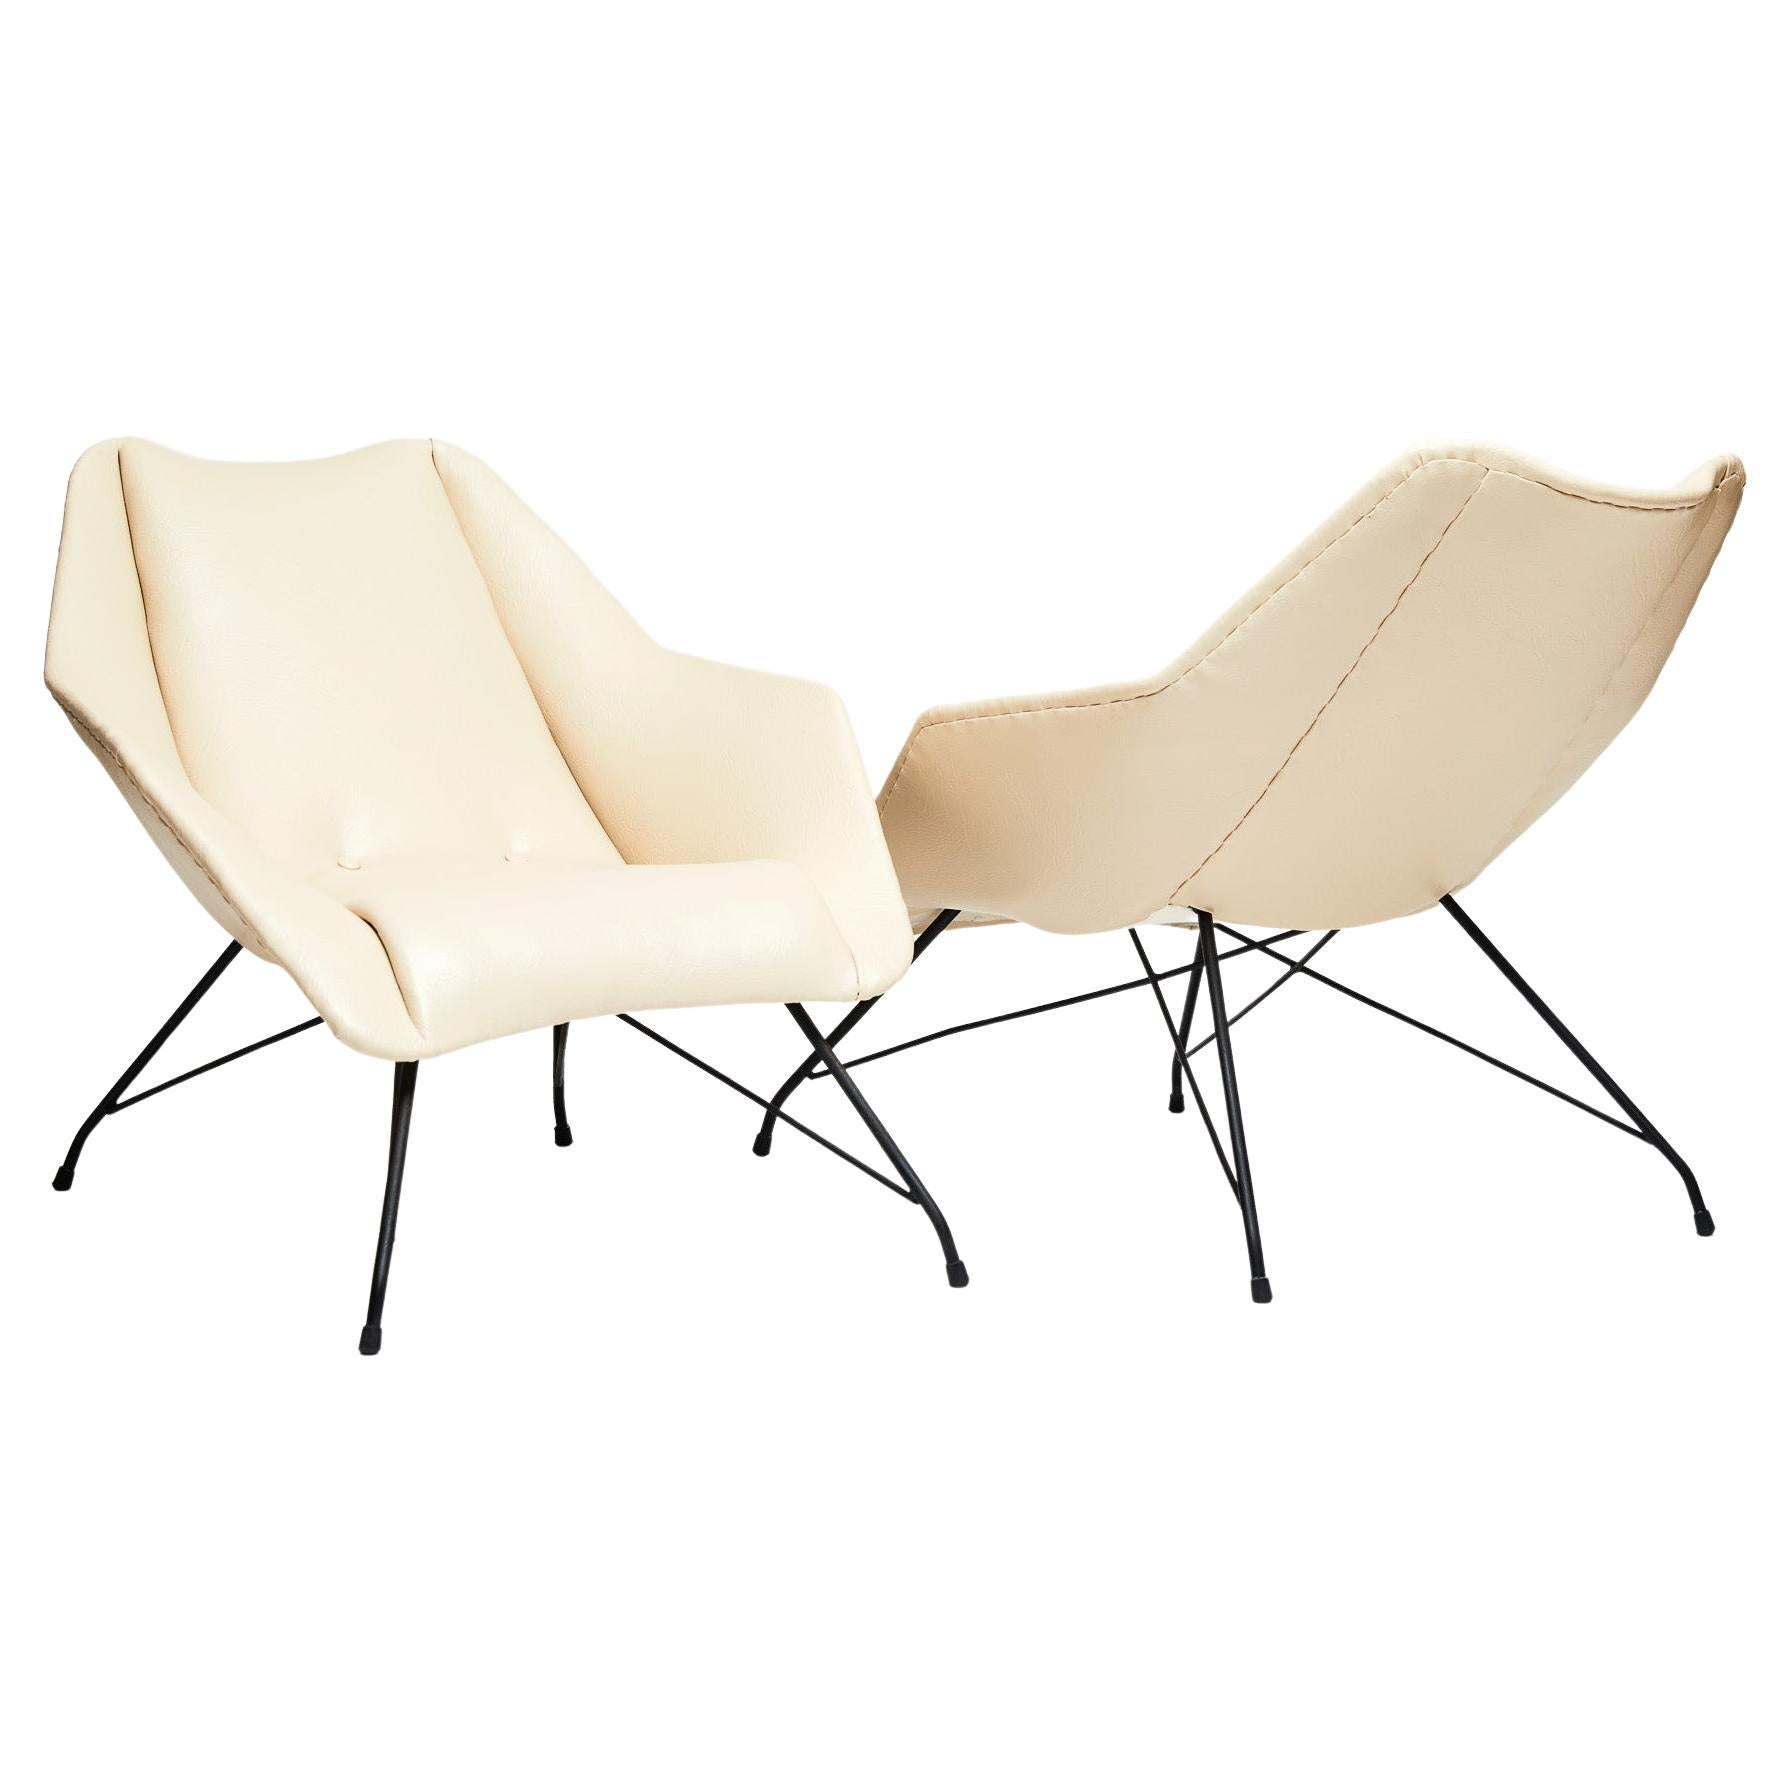 Midcentury Armchairs in White Leather & Iron Base by Carlo Hauner, 1955, Brazil For Sale